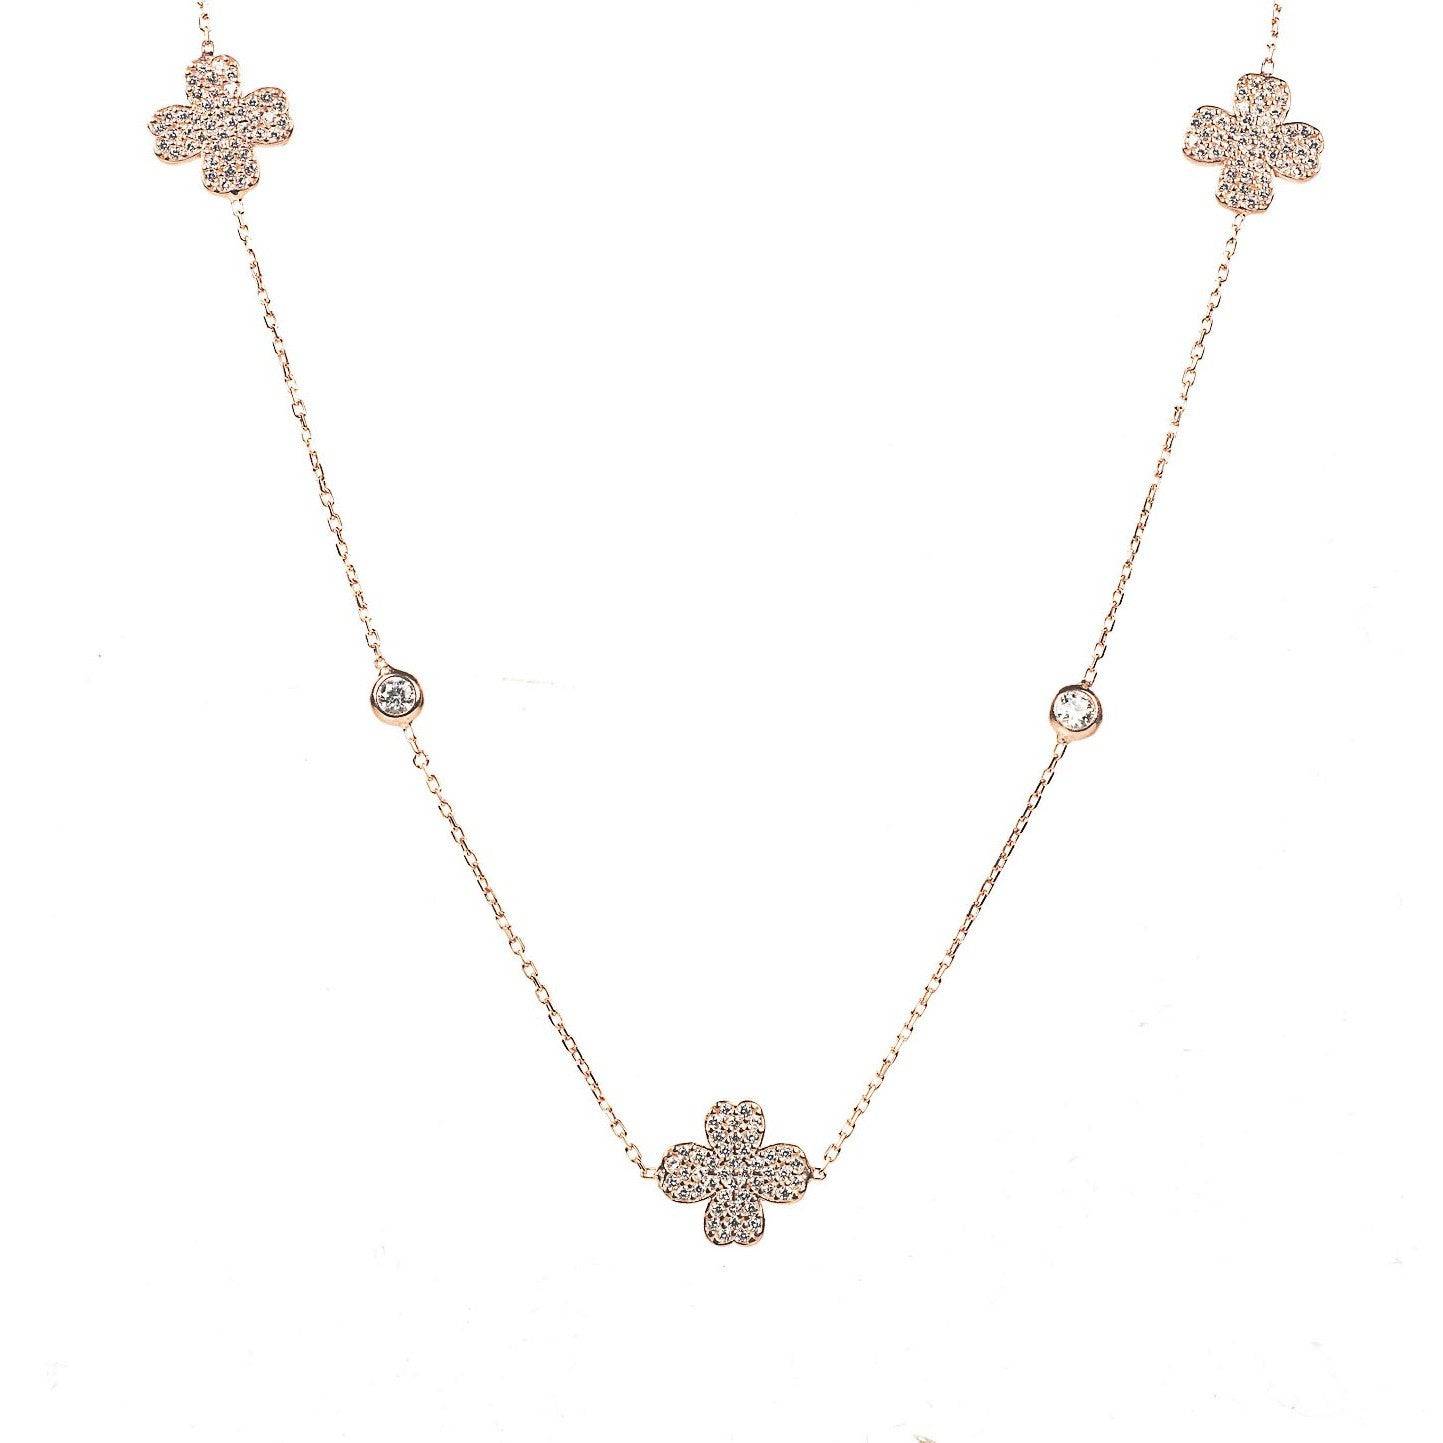 Lucky Four Leaf Clover Necklace Long Rose Gold - LATELITA Necklaces